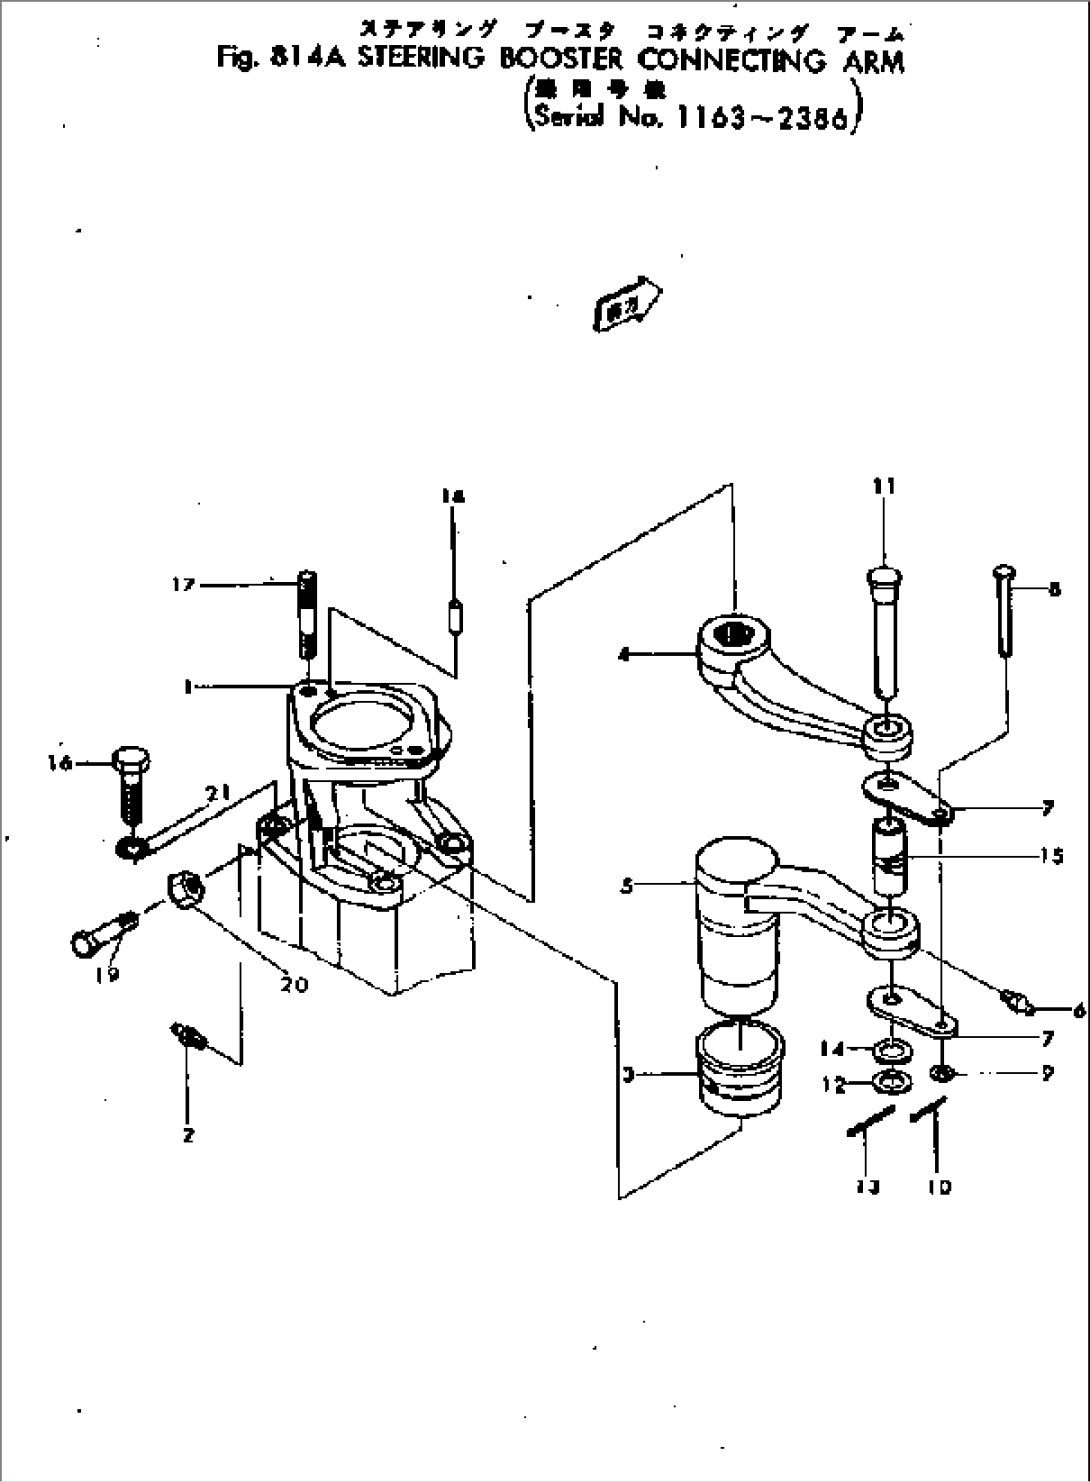 STEERING BOOSTER CONNECTING ARM(#2101-2386)